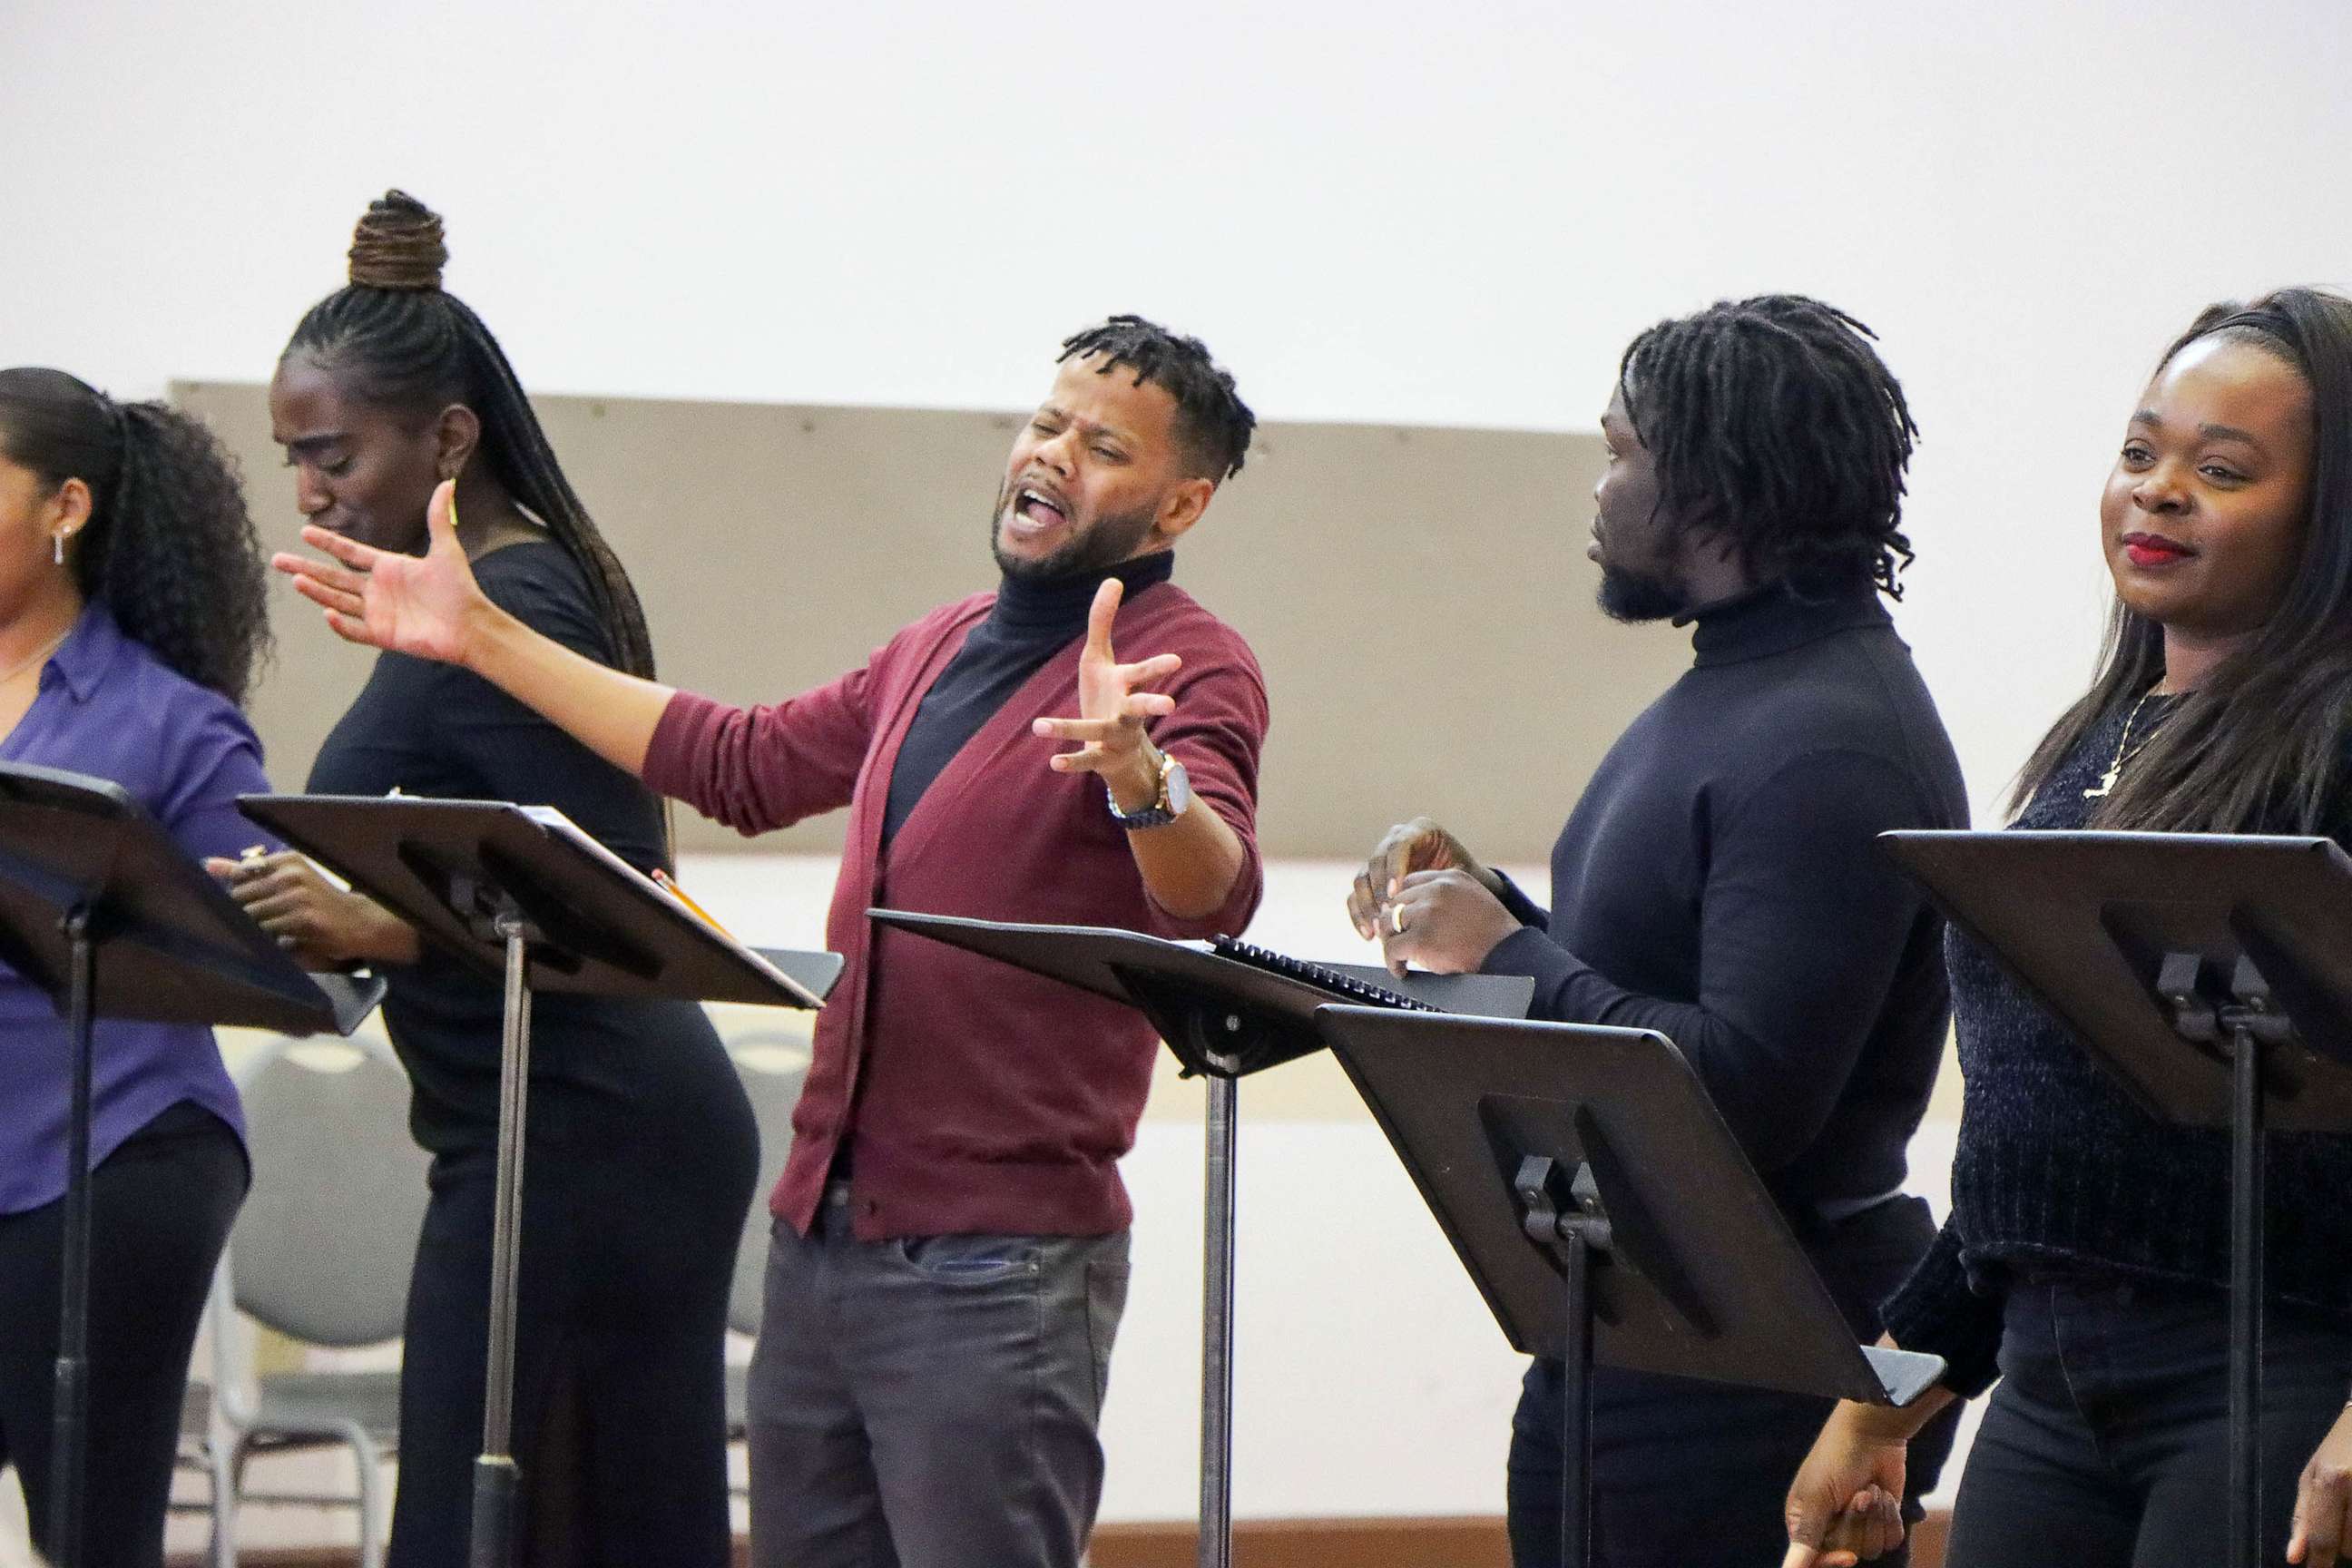 PHOTO: A rehearsal for "Madison Lodge" by Tre'von Griffith, part of Opera Theatre of St. Louis' New Works Collective.